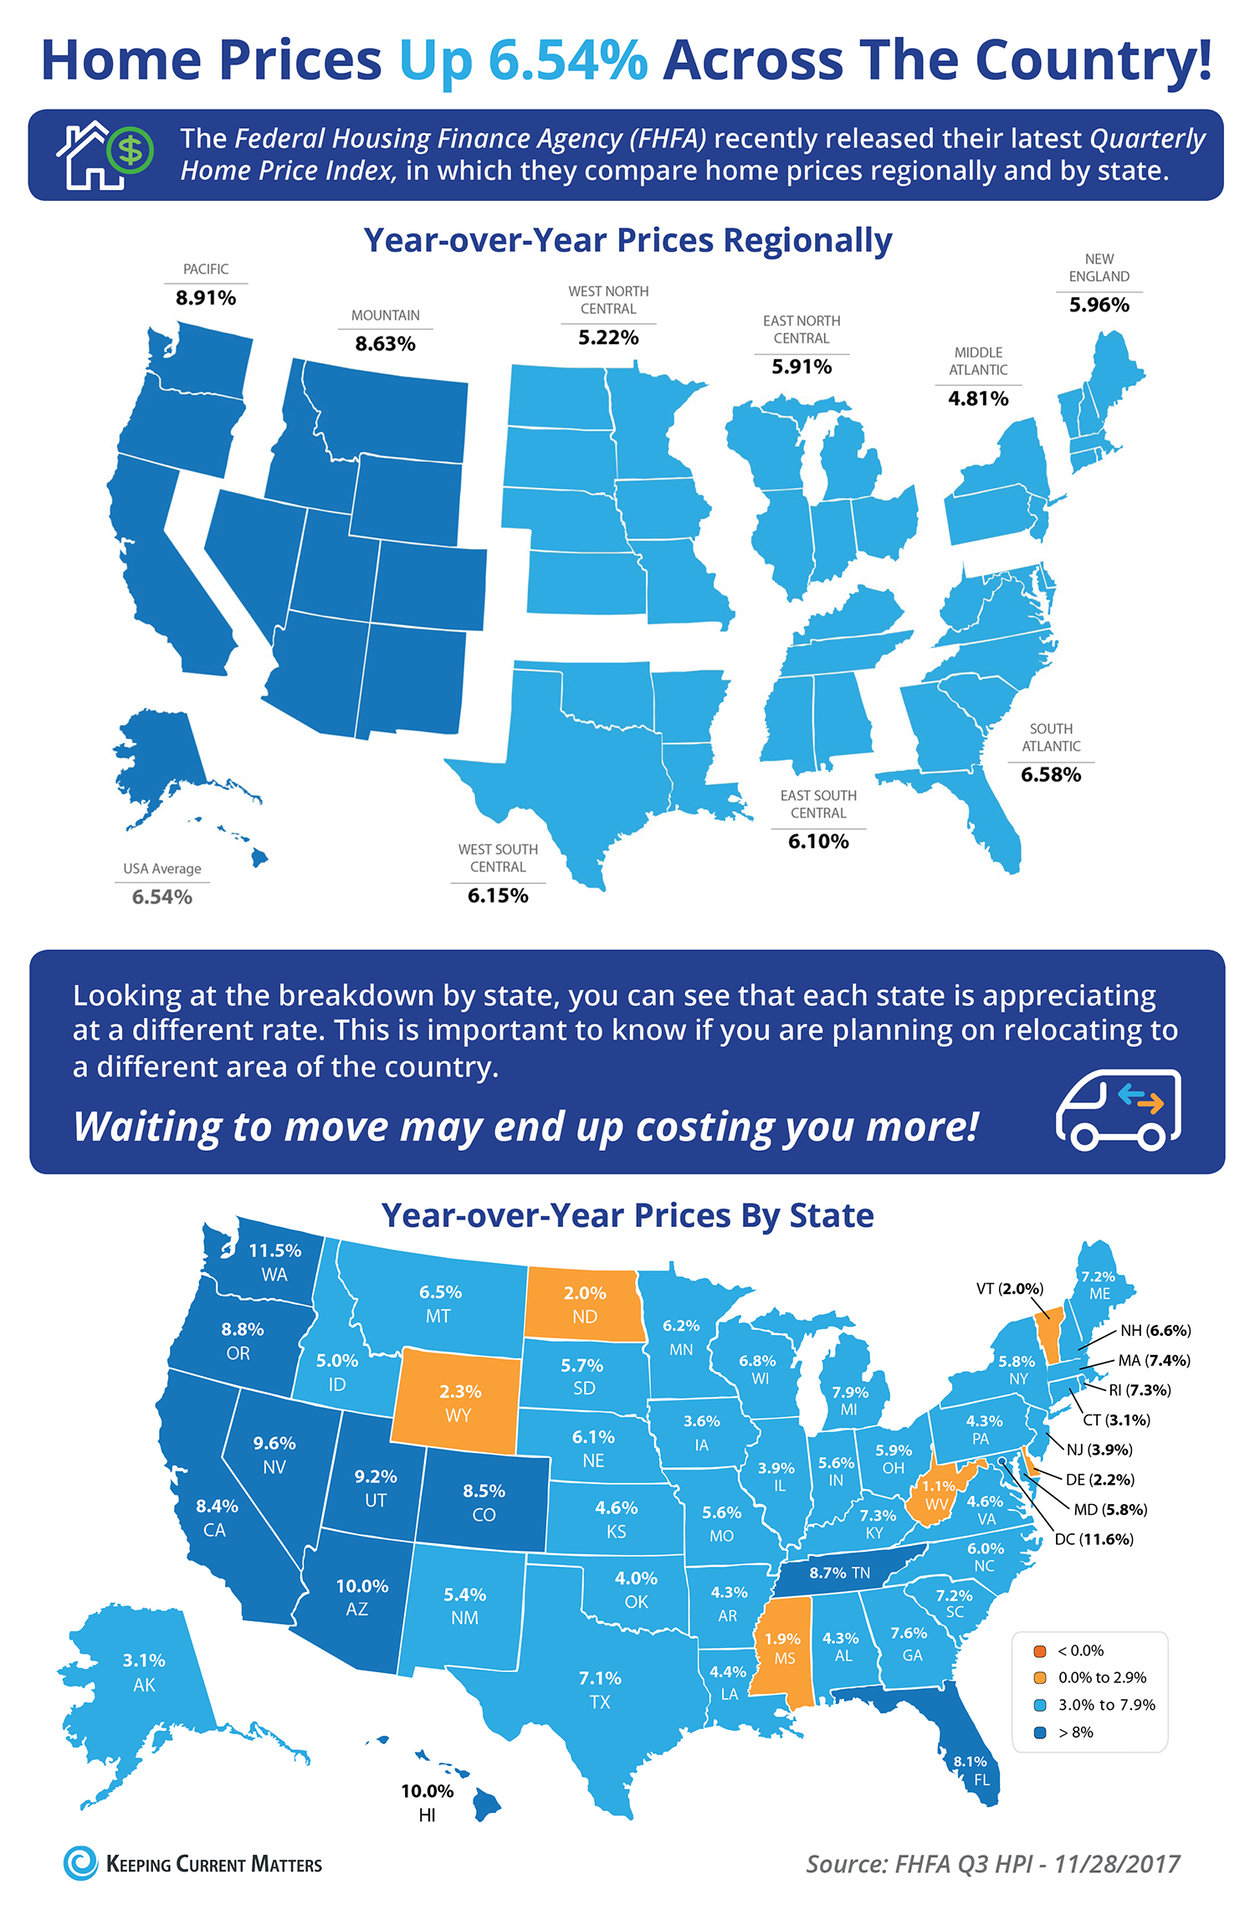 Home Prices Up 6.54% Across the Country! [INFOGRAPHIC] | Keeping Current Matters